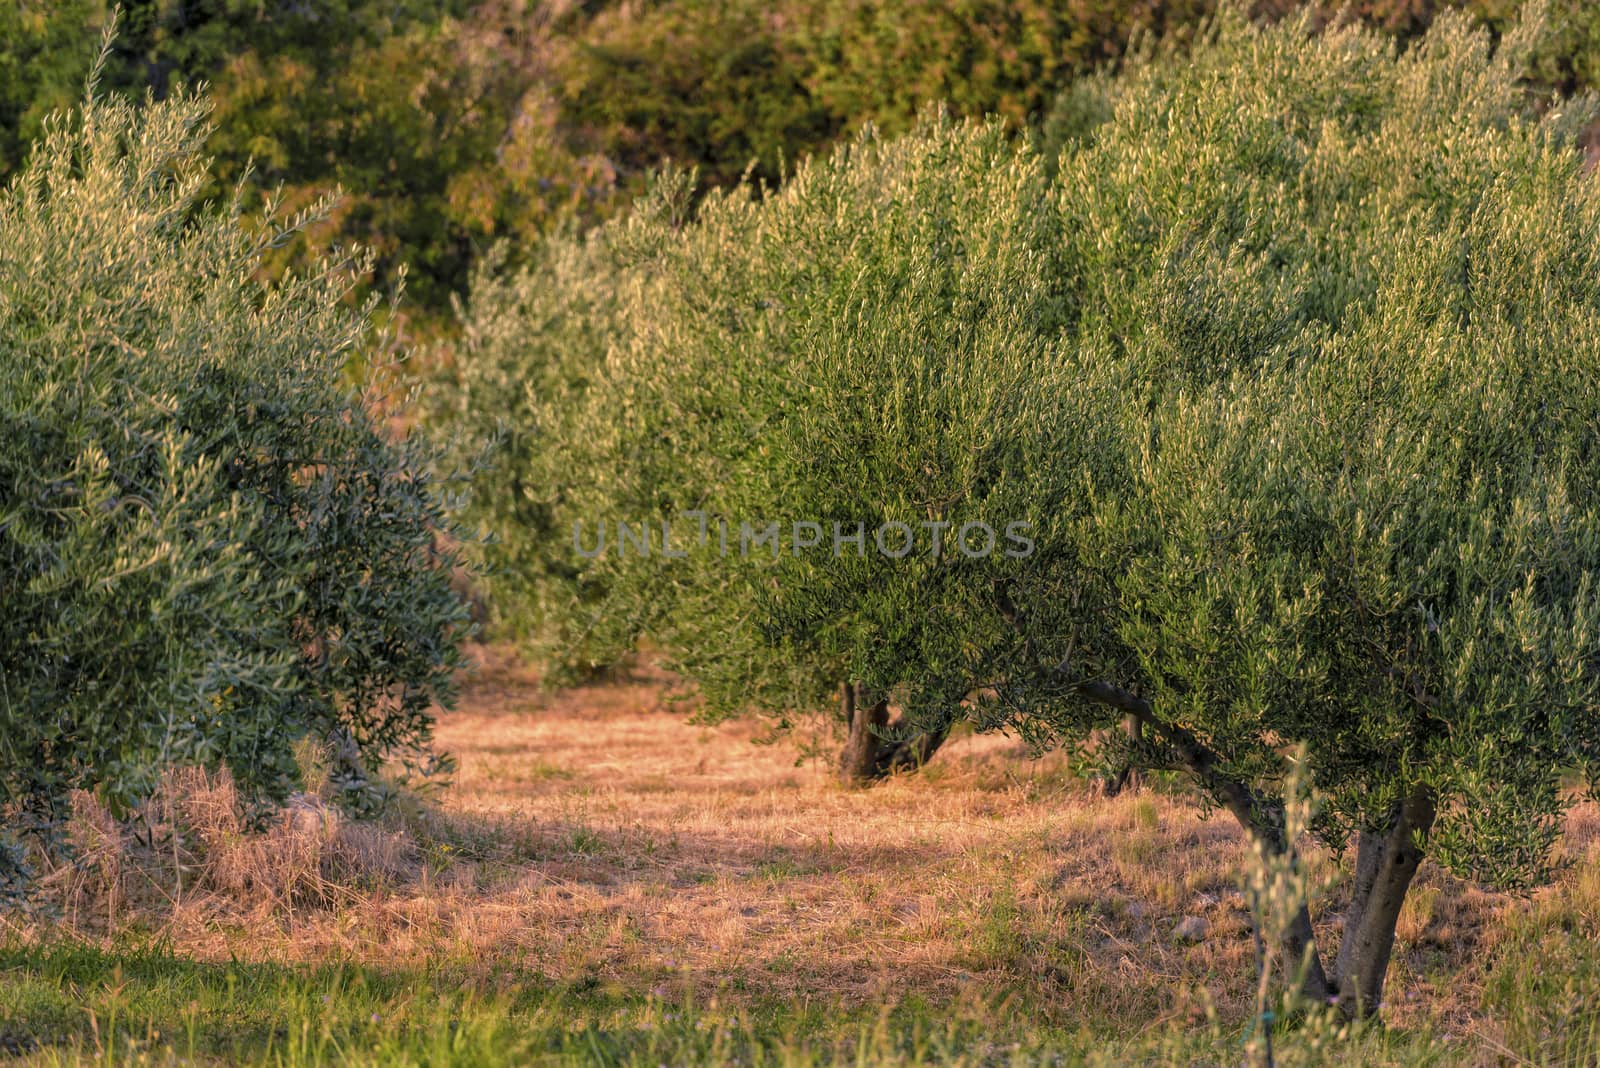 Olive trees at sunset, selective focus